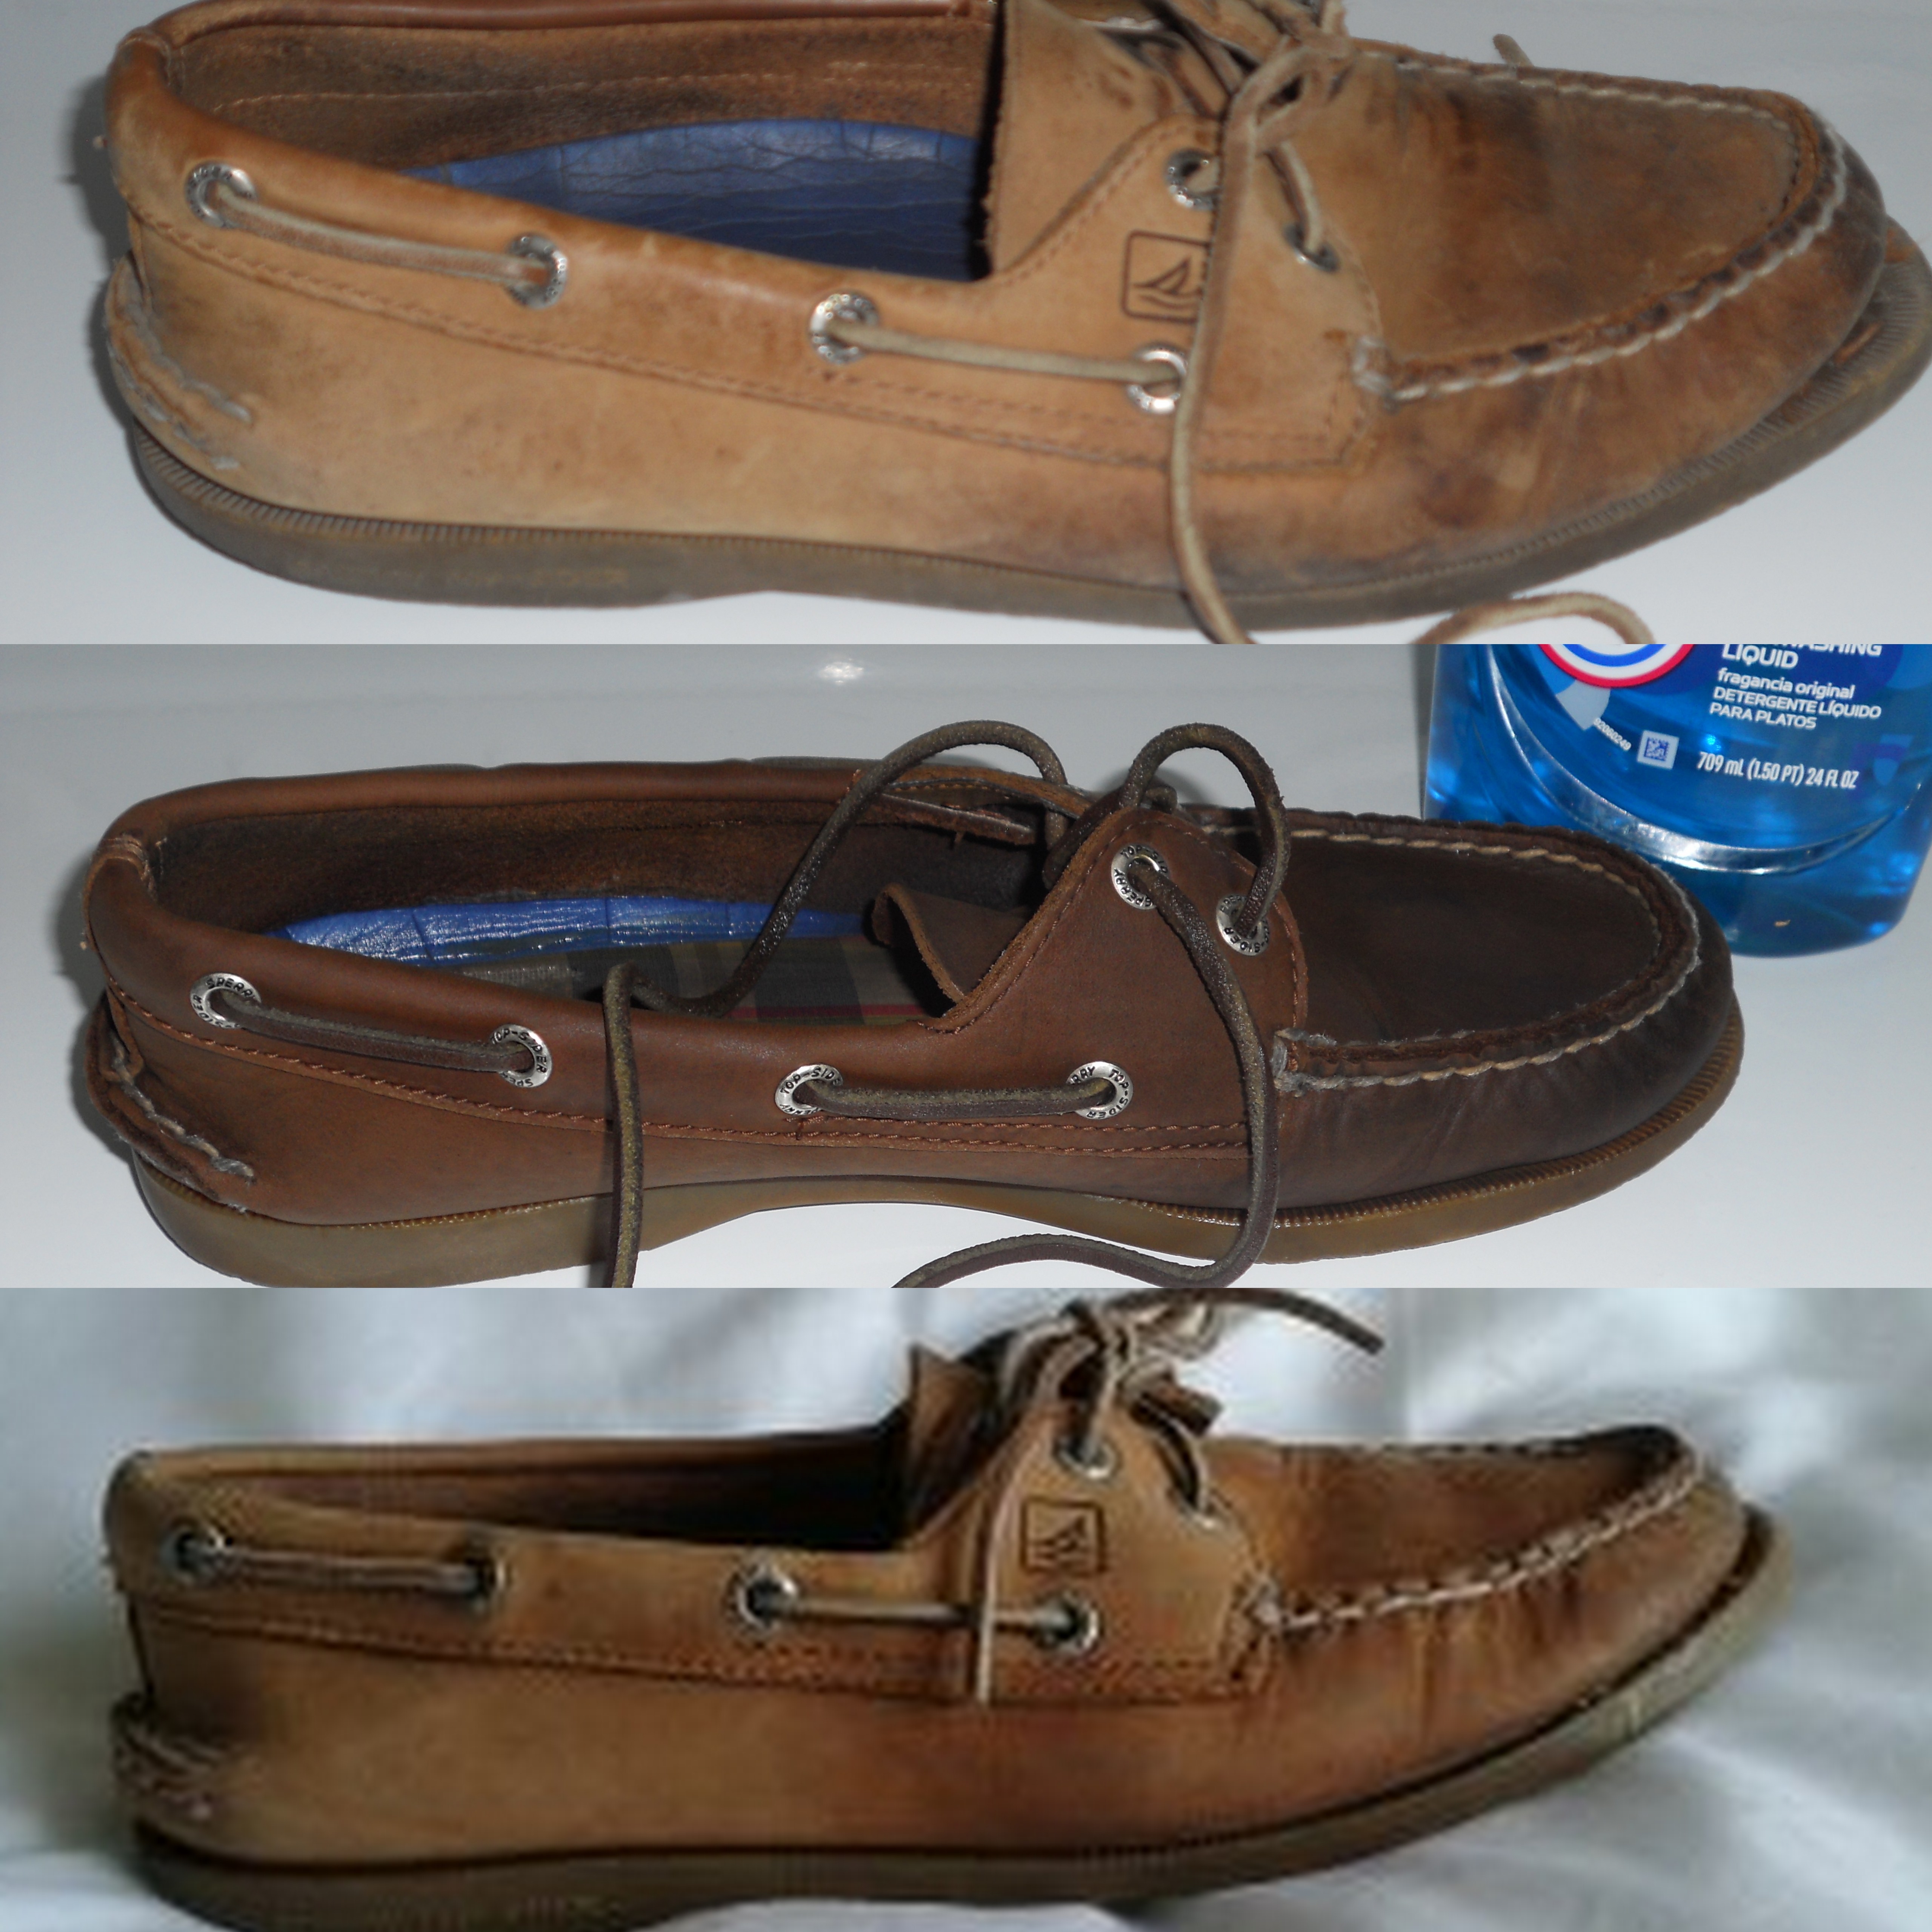 How to clean Sperry Top-siders